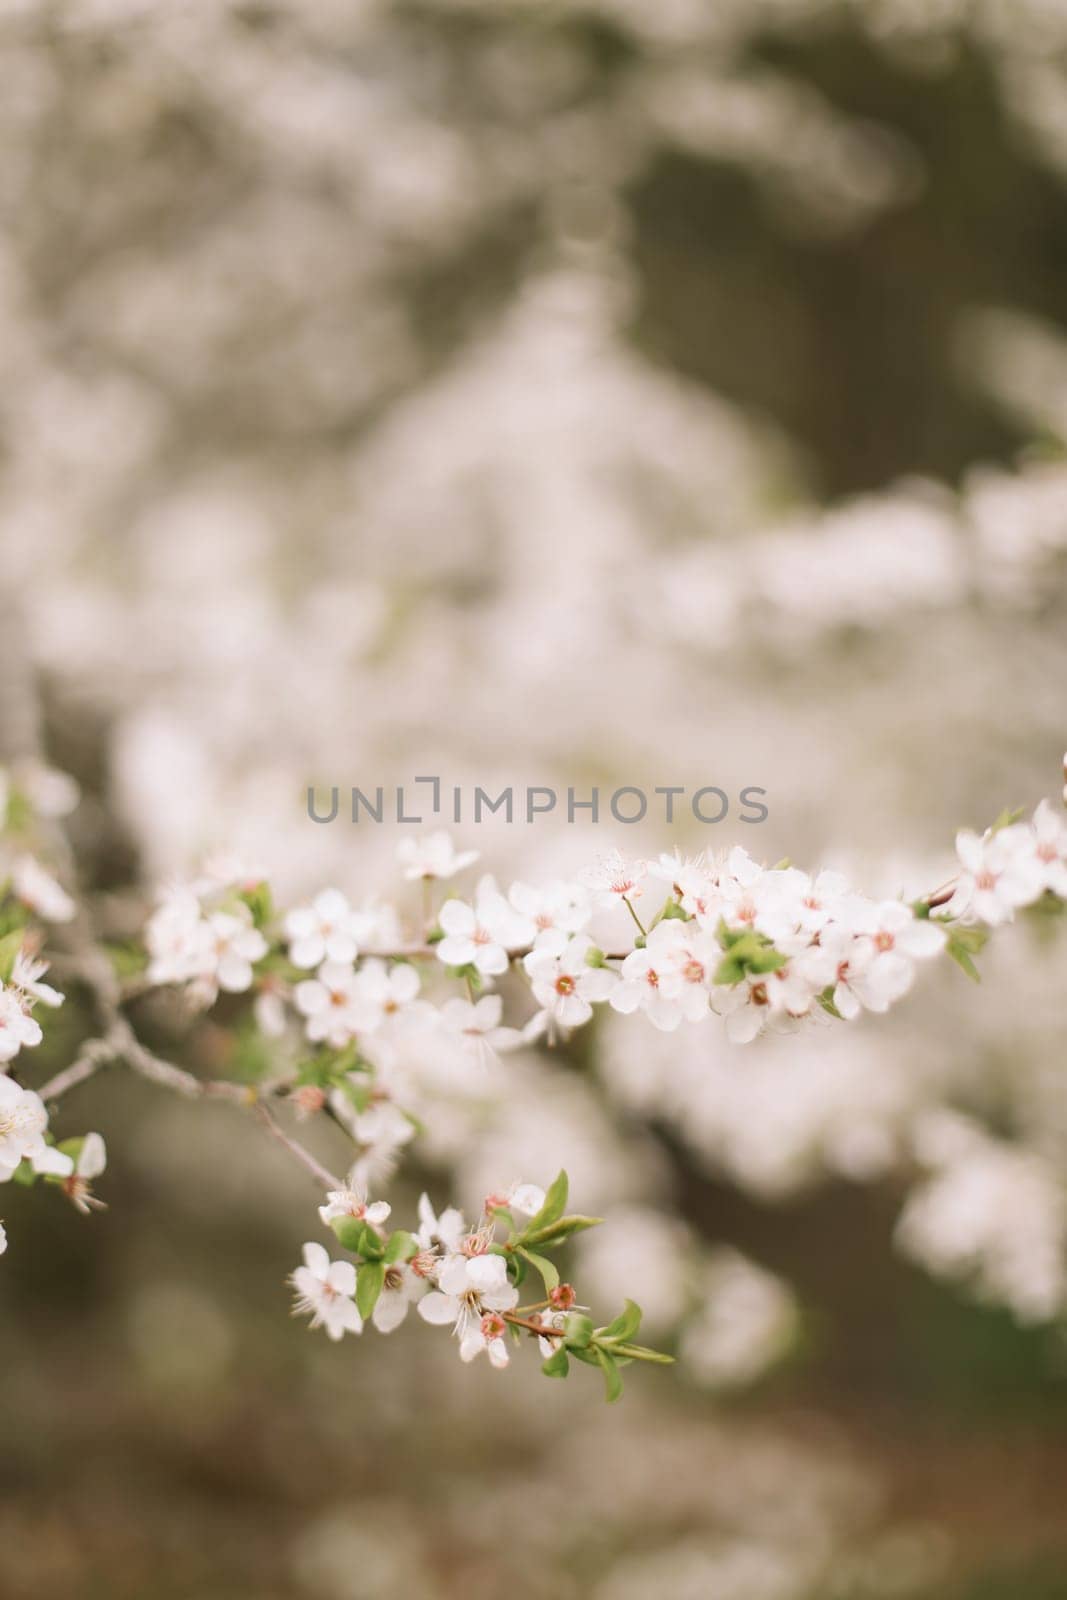 Branches of blossoming cherry or apple tree macro with soft focus on gentle light nature background in sunlight with copy space. Beautiful floral image of spring nature panoramic view by paralisart